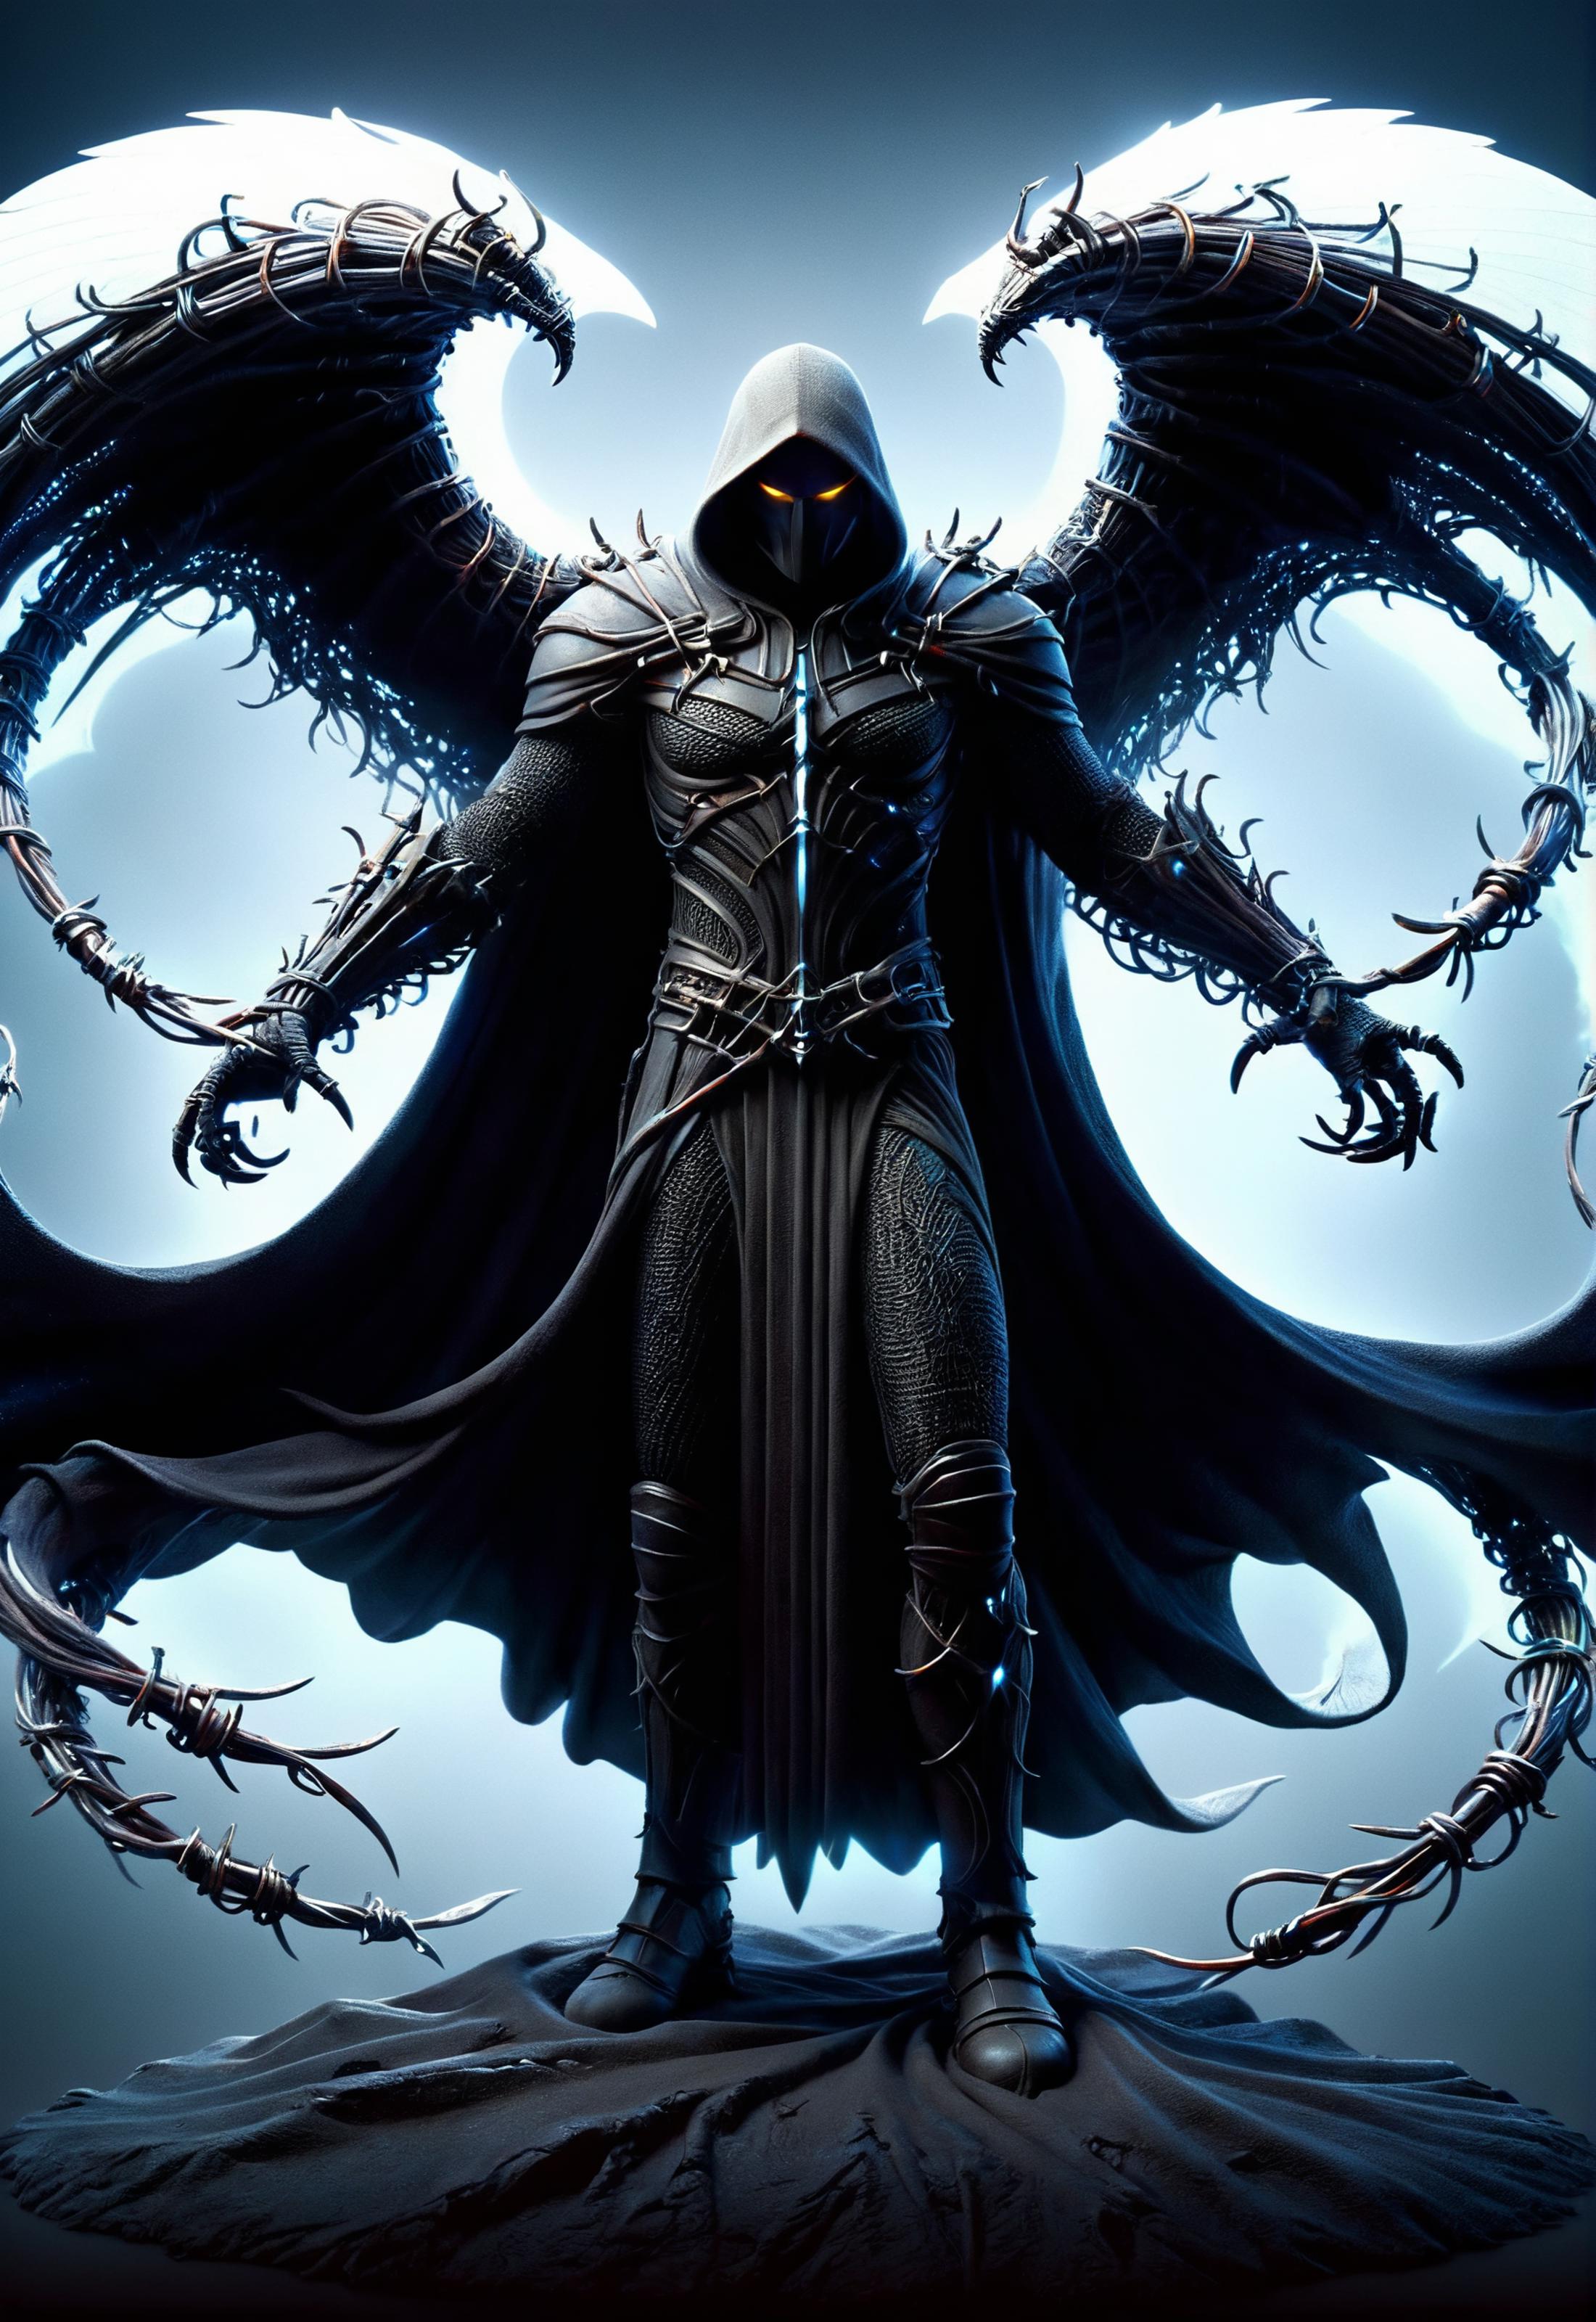 A dark figure with black wings and a hooded cloak standing in front of a blue sky.